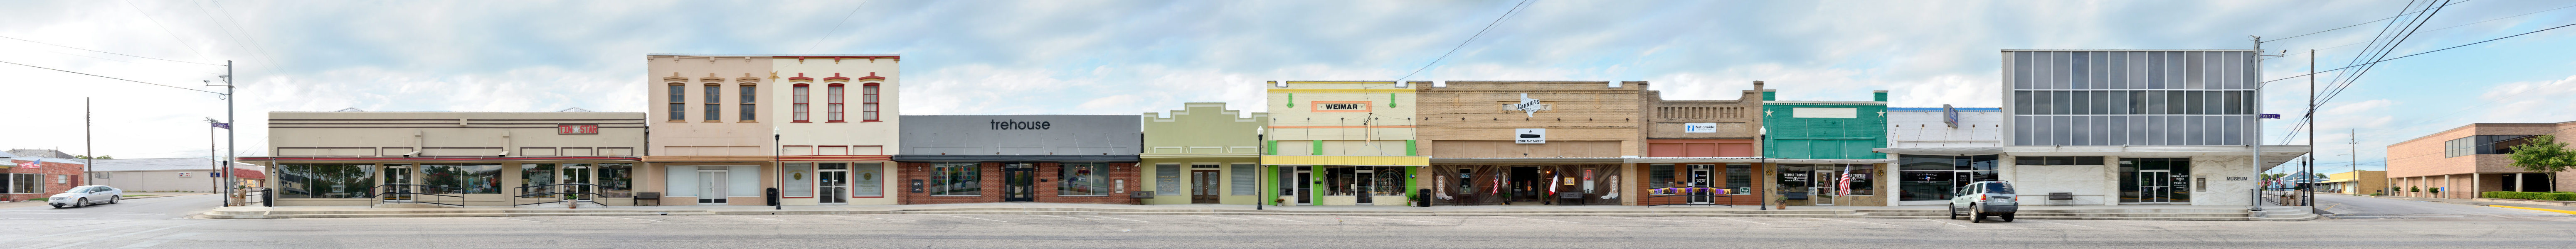 Weimar Texas streetview architecture photography